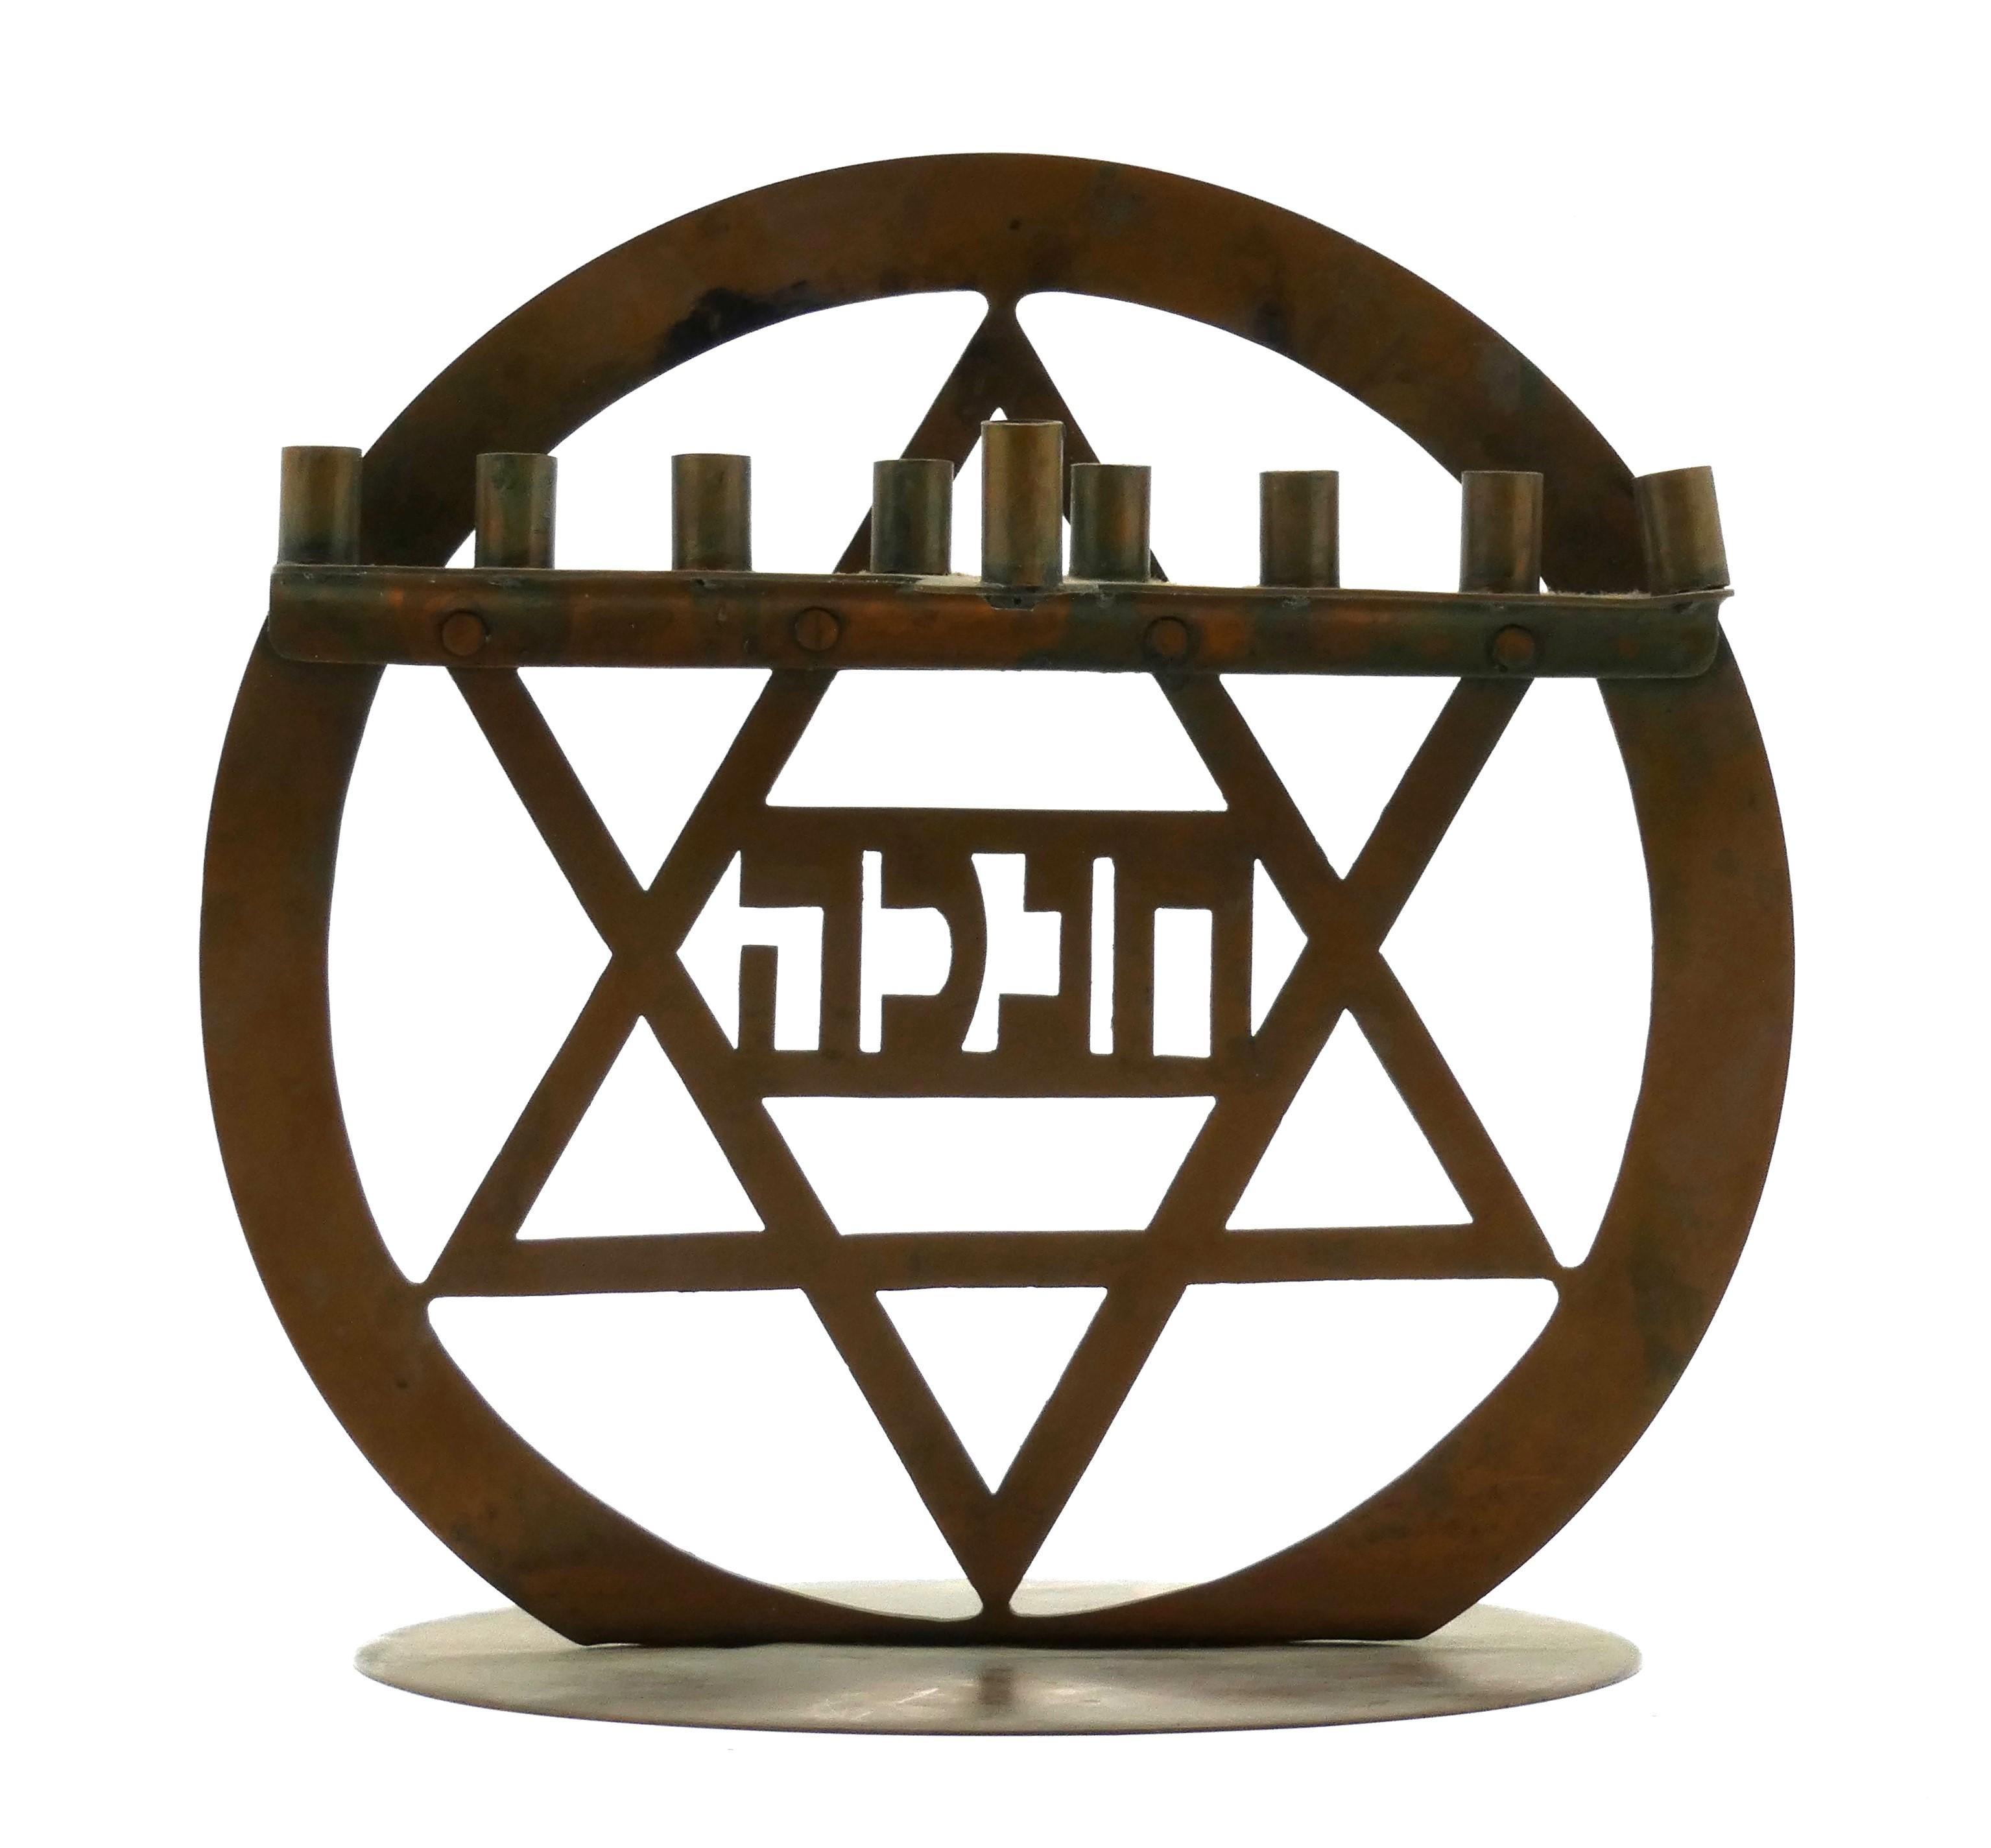 This Hanukkah Lamp is yet another classic example of the Art Deco movement in the early 1900's.

Hanukkah Lamp rests on a flat circular base supporting the main upper body attached to its center.

The backplate of this lamp's body is circular in